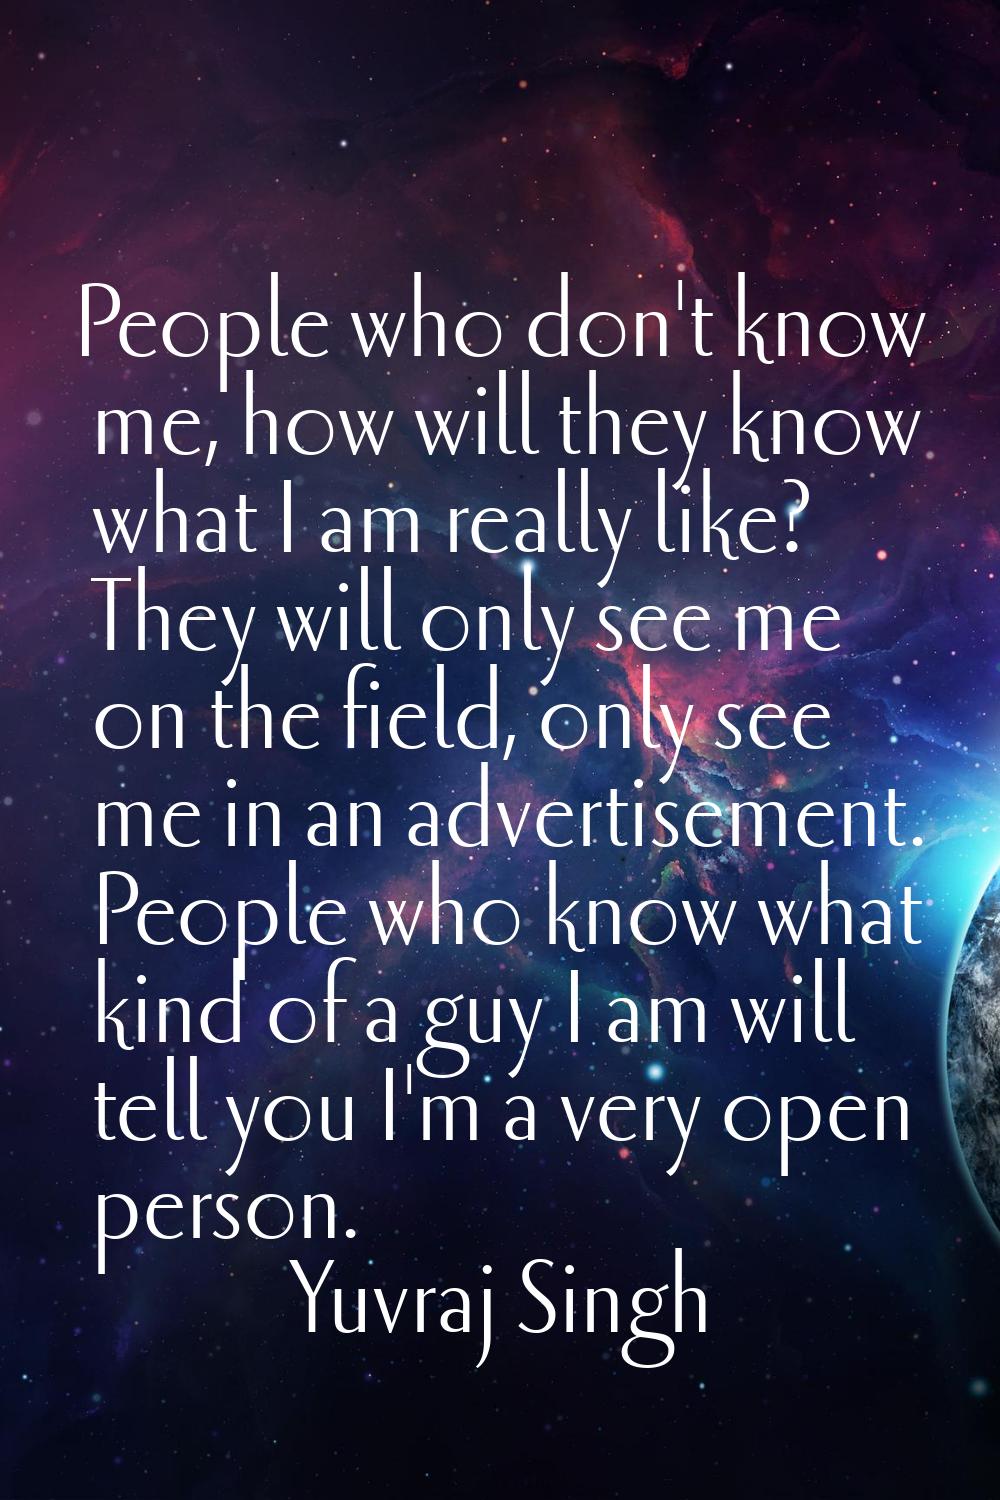 People who don't know me, how will they know what I am really like? They will only see me on the fi